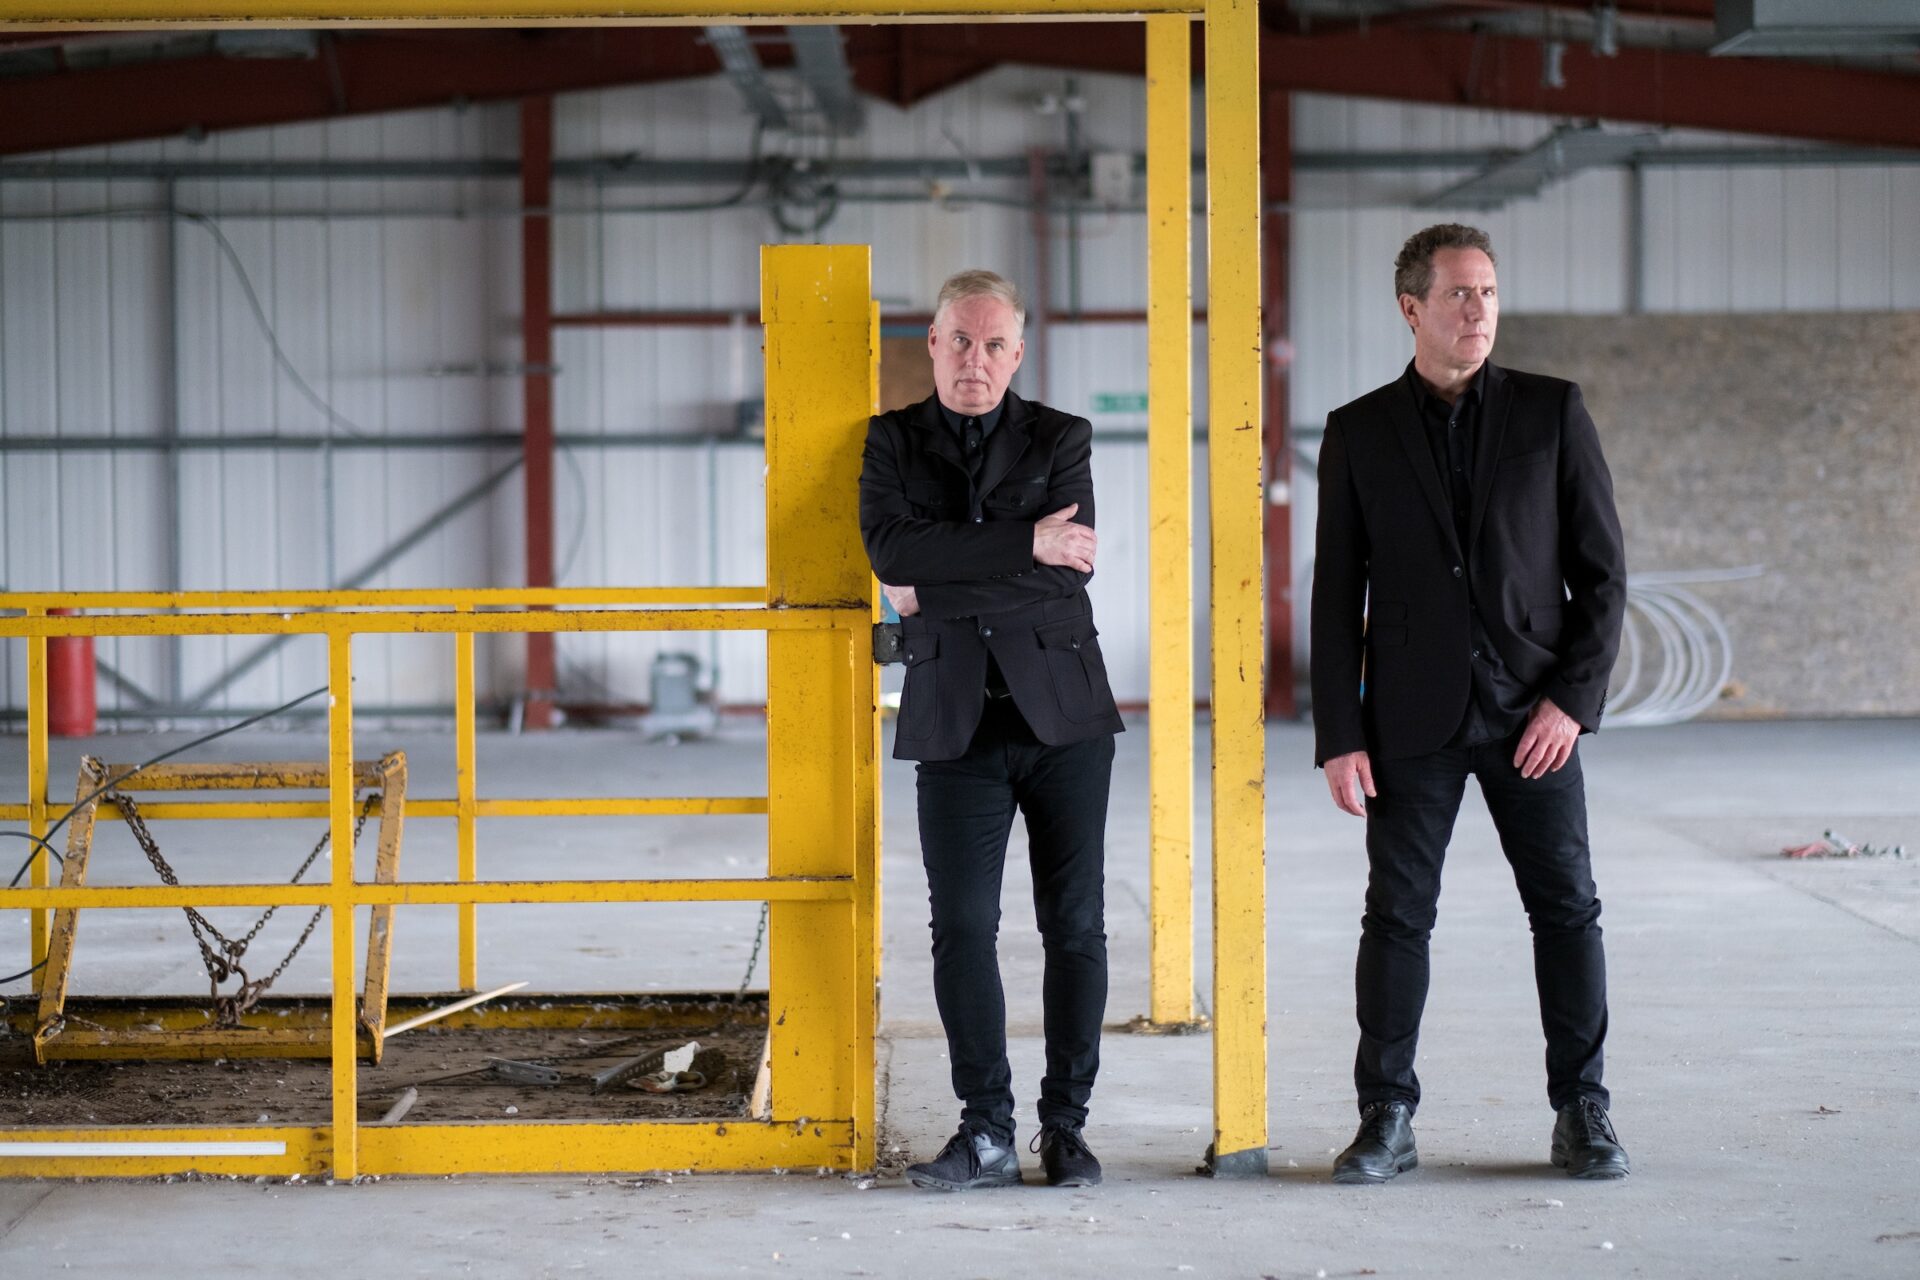 NEWS: OMD reveal new video 'The Punishment of Luxury'